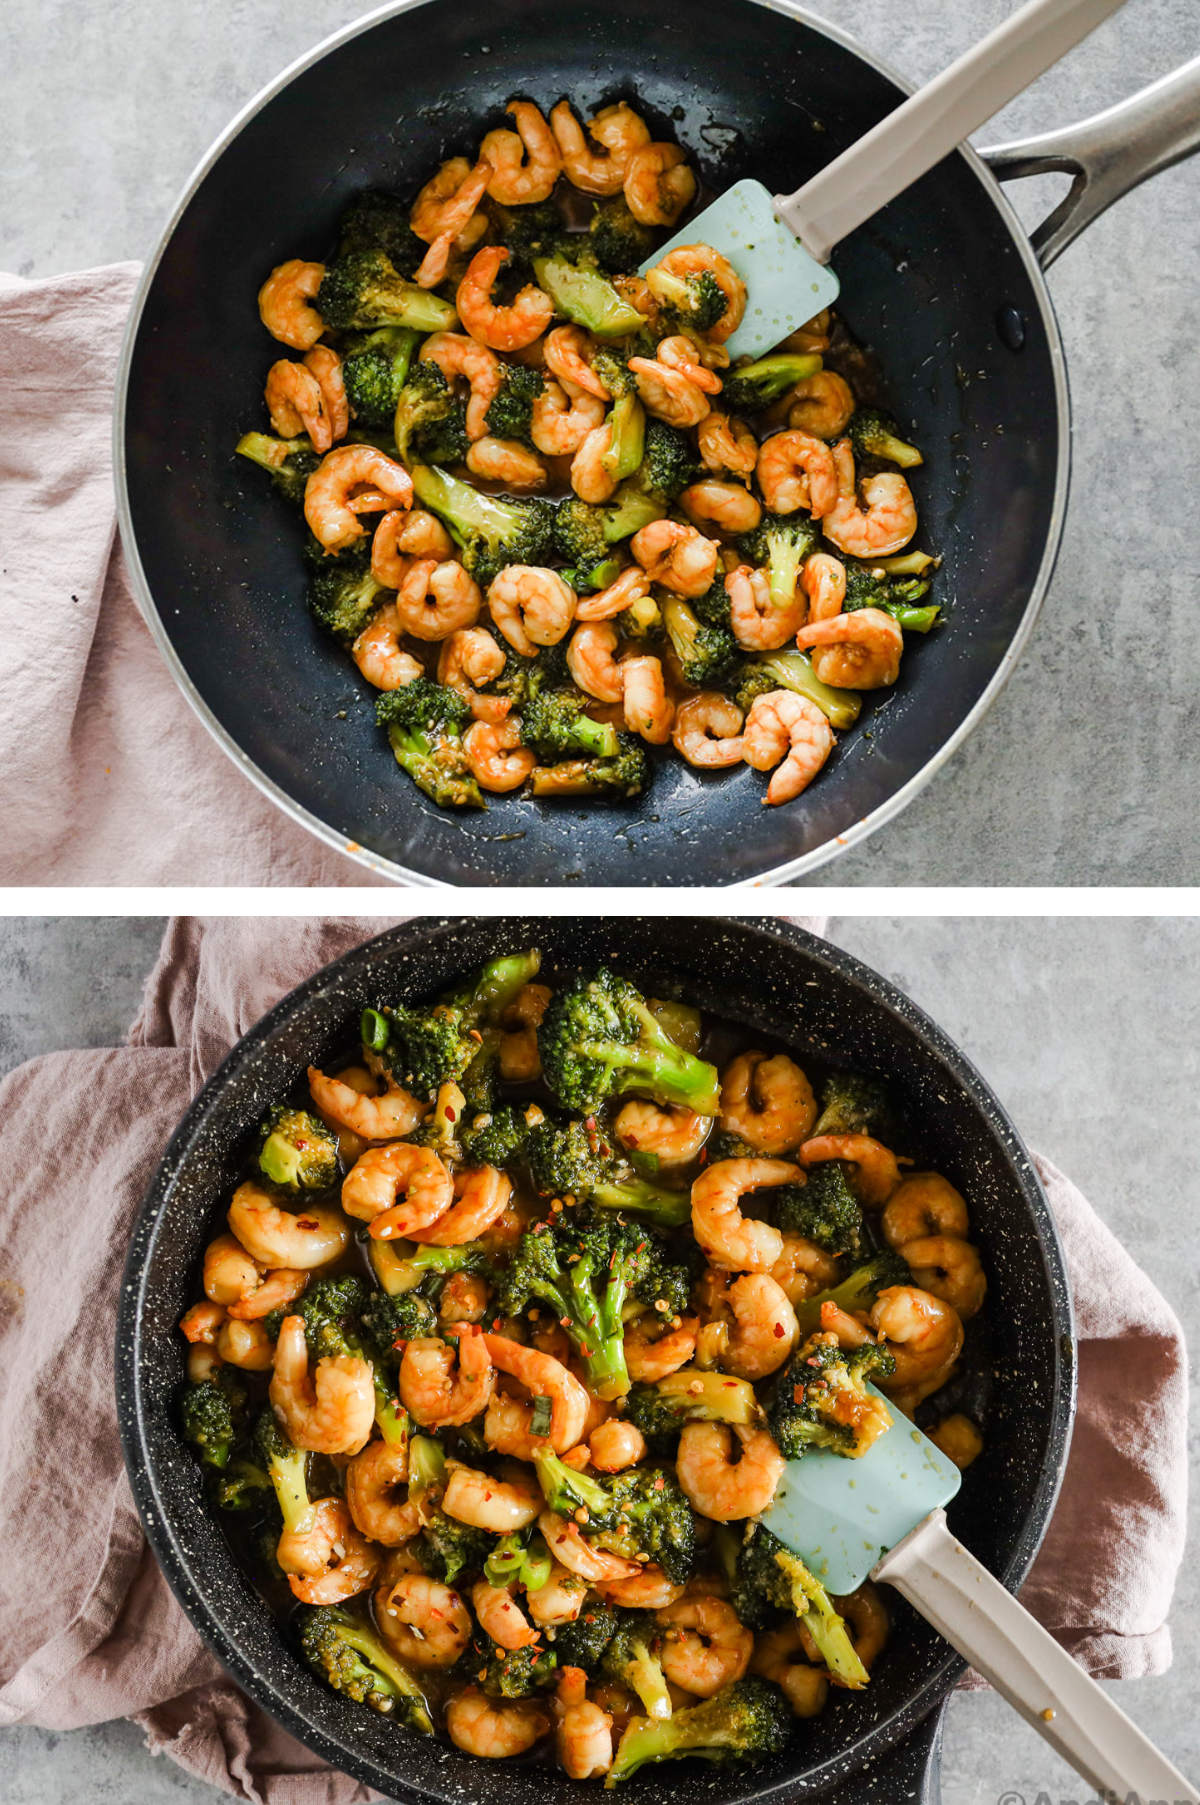 Two overhead images in one: 1. Shrimp and broccoli are mixed in frying pan. 3. Chile flakes are added to the finished recipe. 